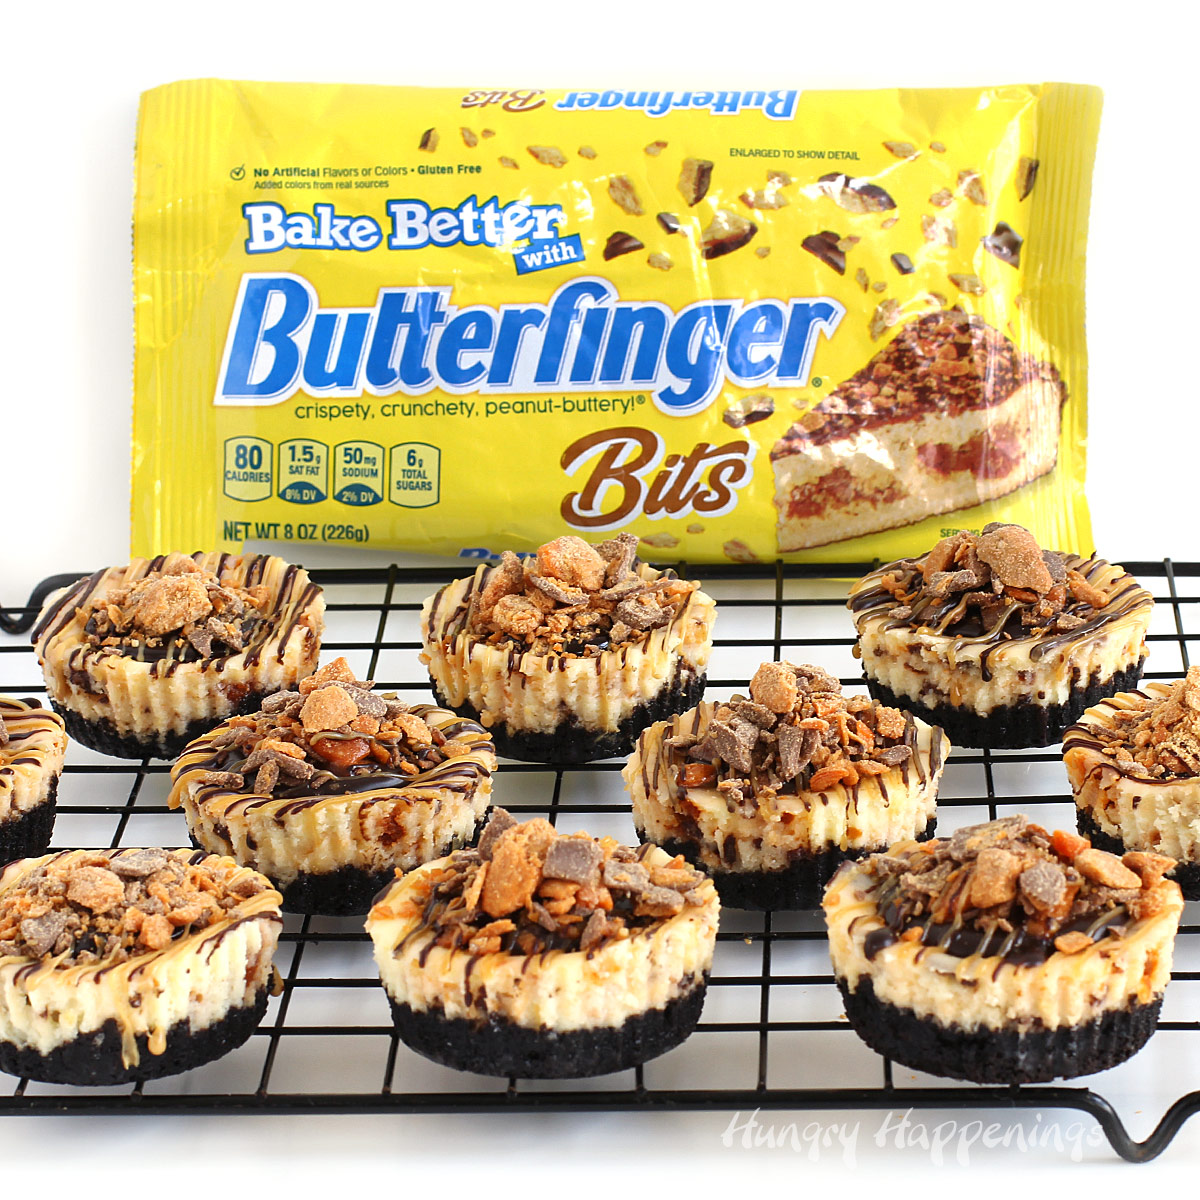 Mini cheesecakes baked and topped with Butterfinger Baking Bits.